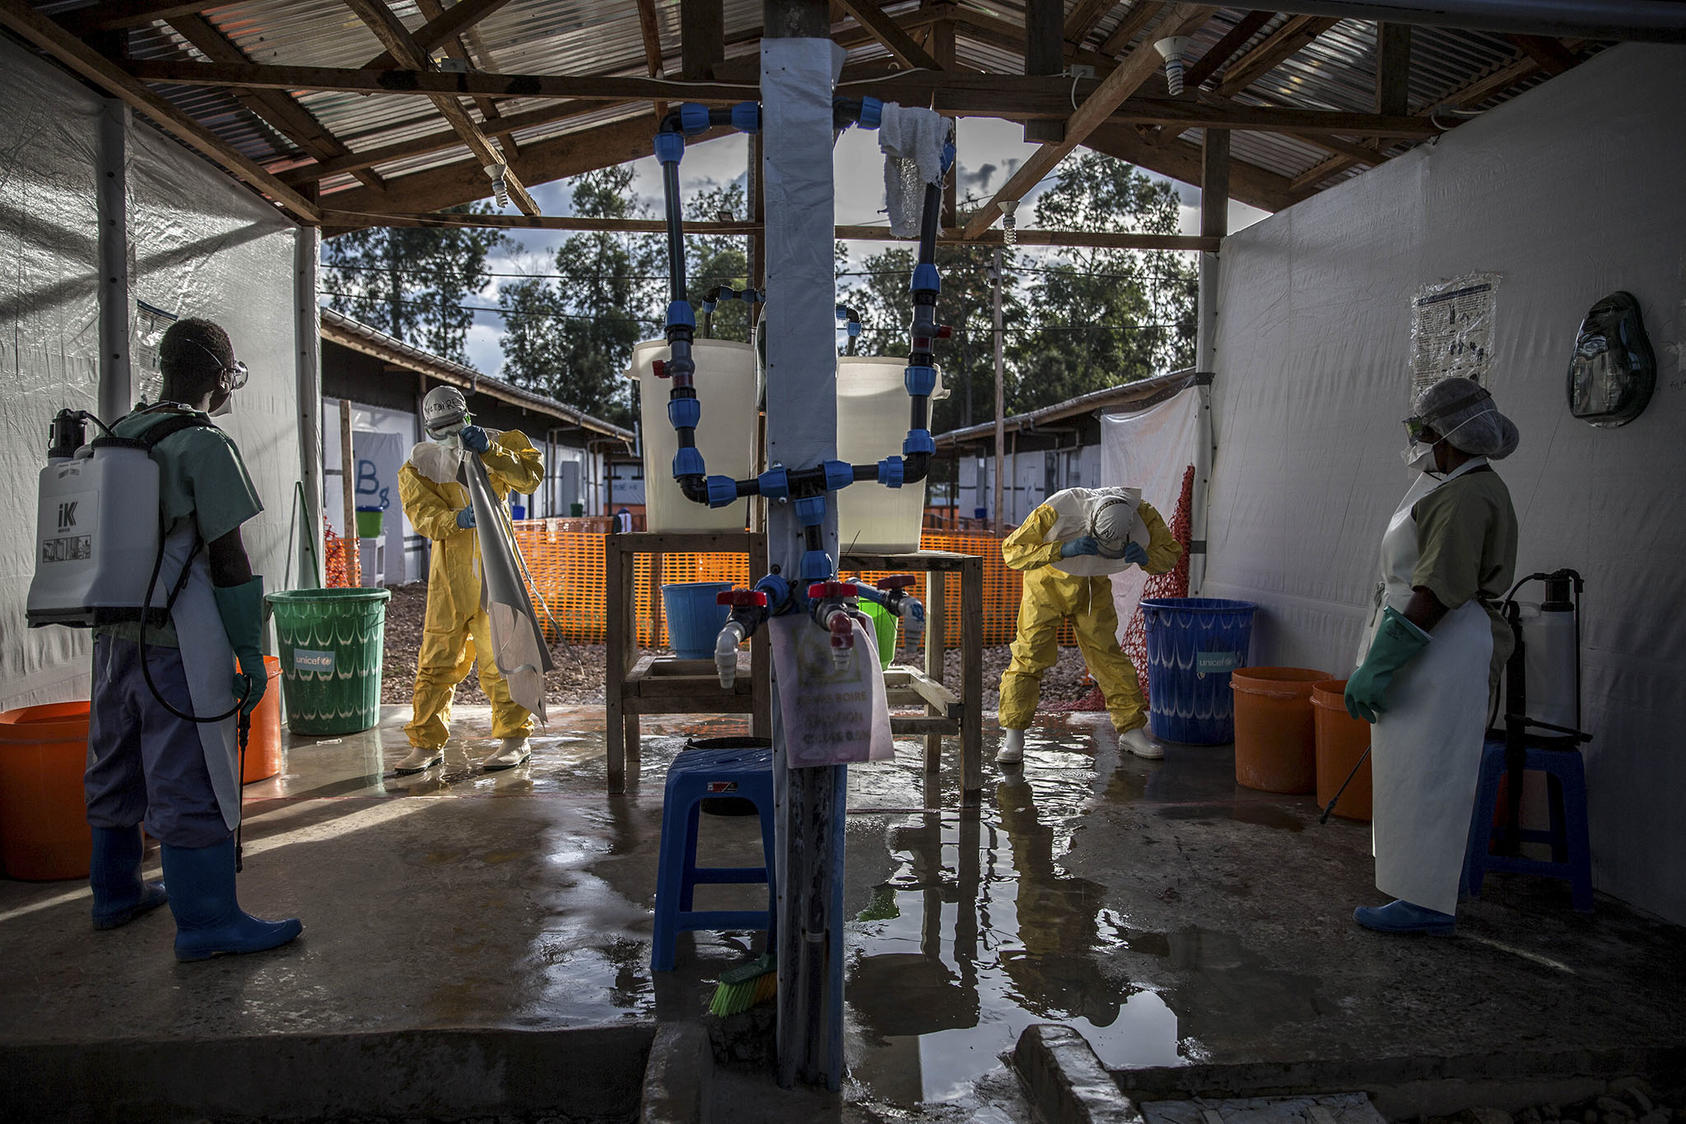 Ebola responders go through decontamination at a treatment center in Katwa, Congo, May 14, 2019. (Finbarr O'Reilly/The New York Times)